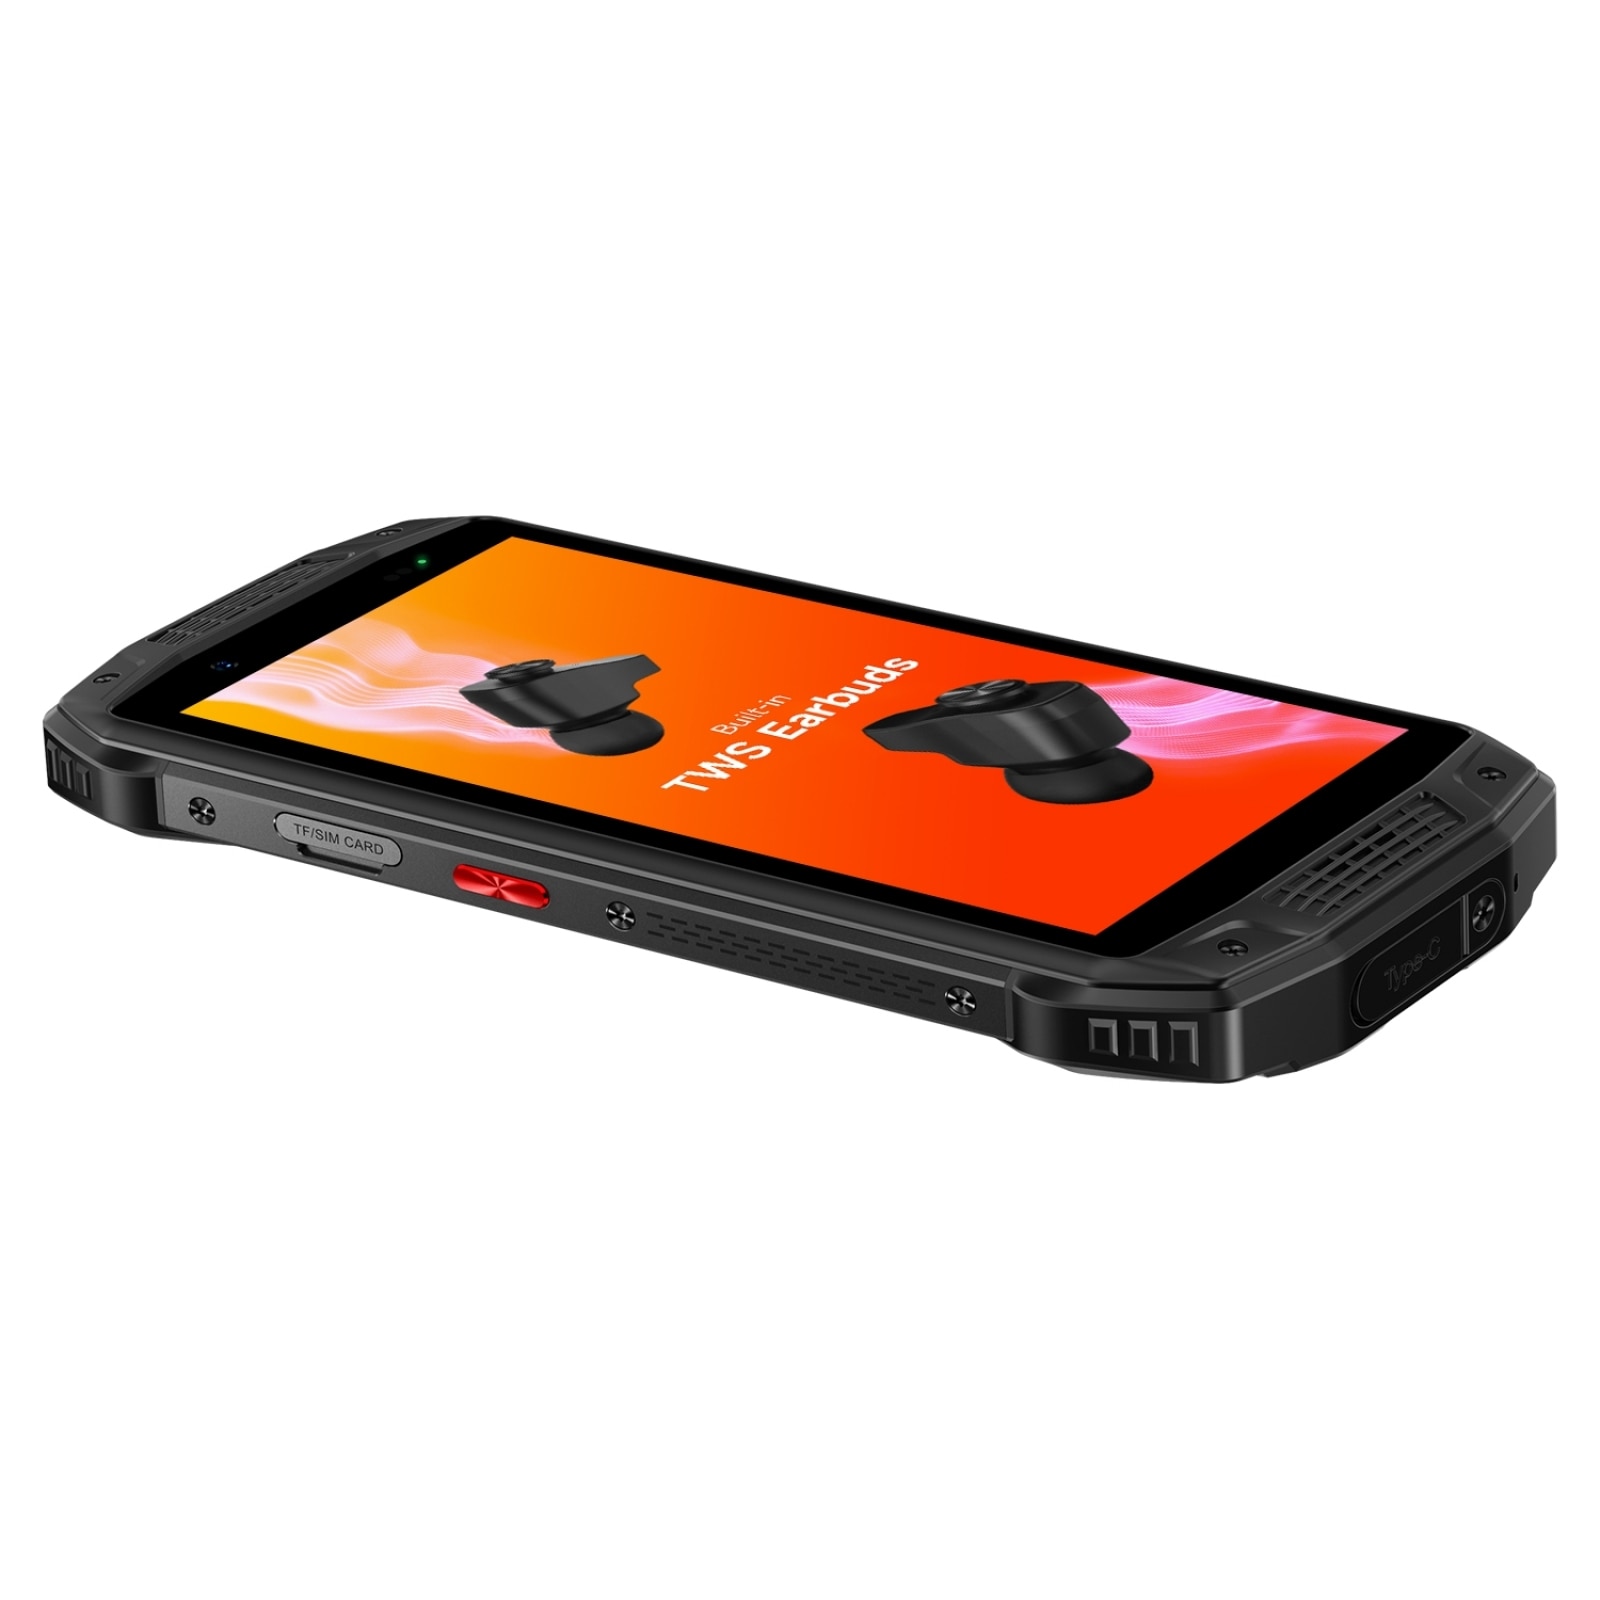 Ulefone Armor 15 smartphone review - Rugged outdoor phone with